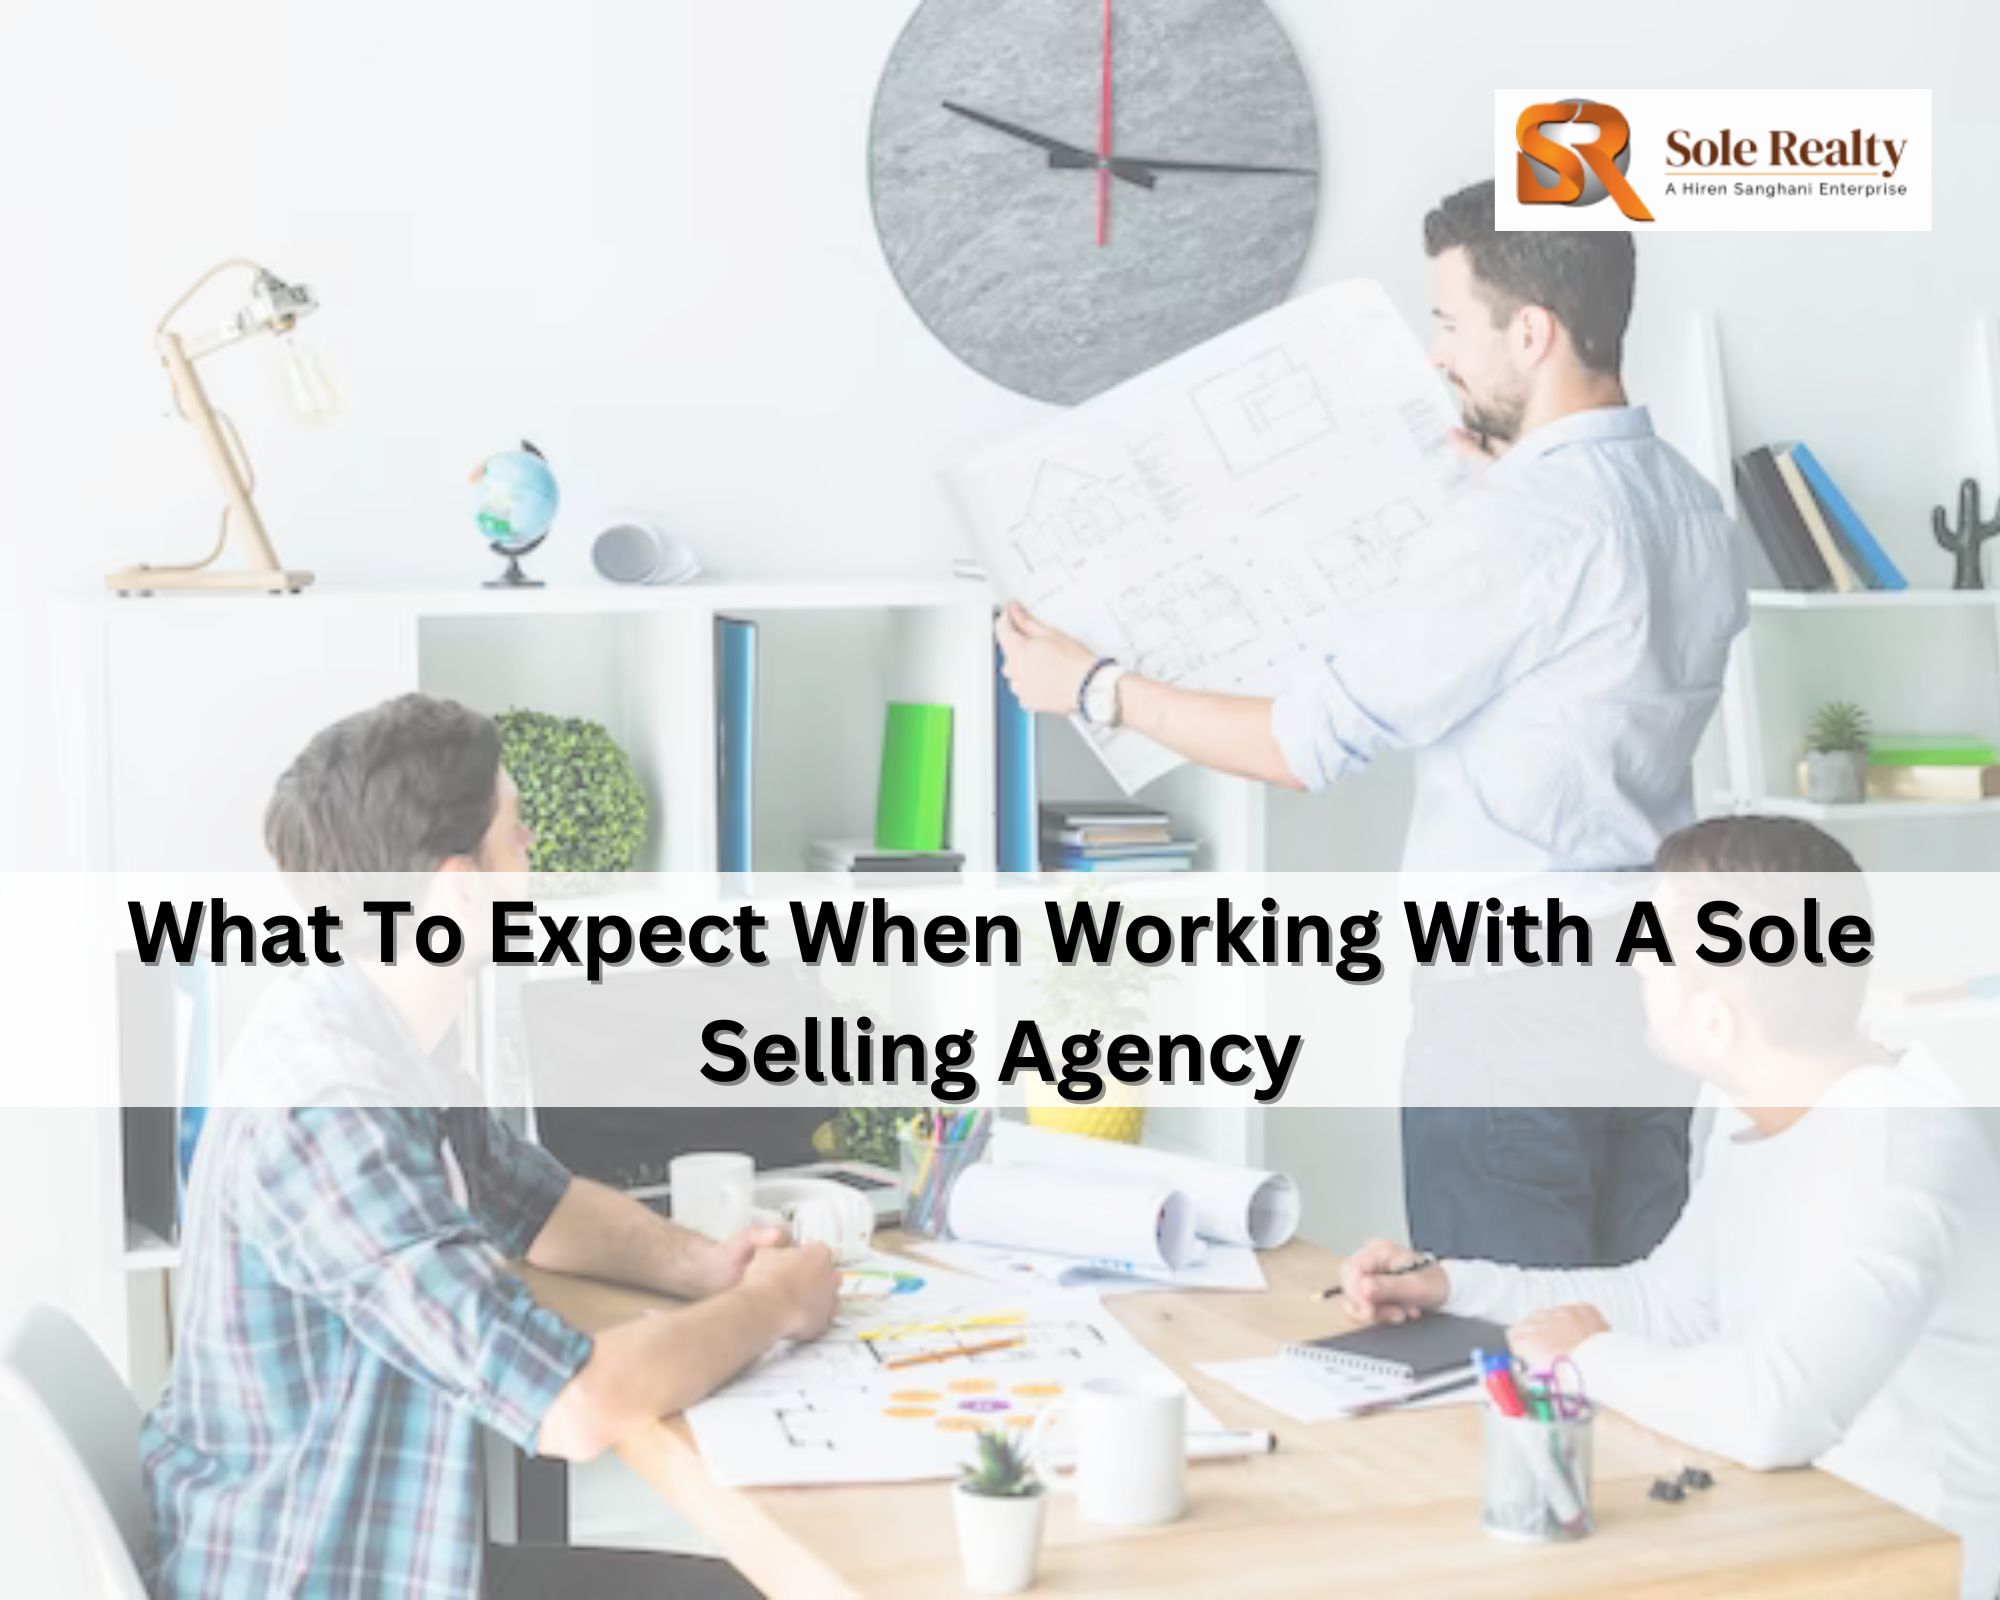 What To Expect When Working With A Sole Selling Agency